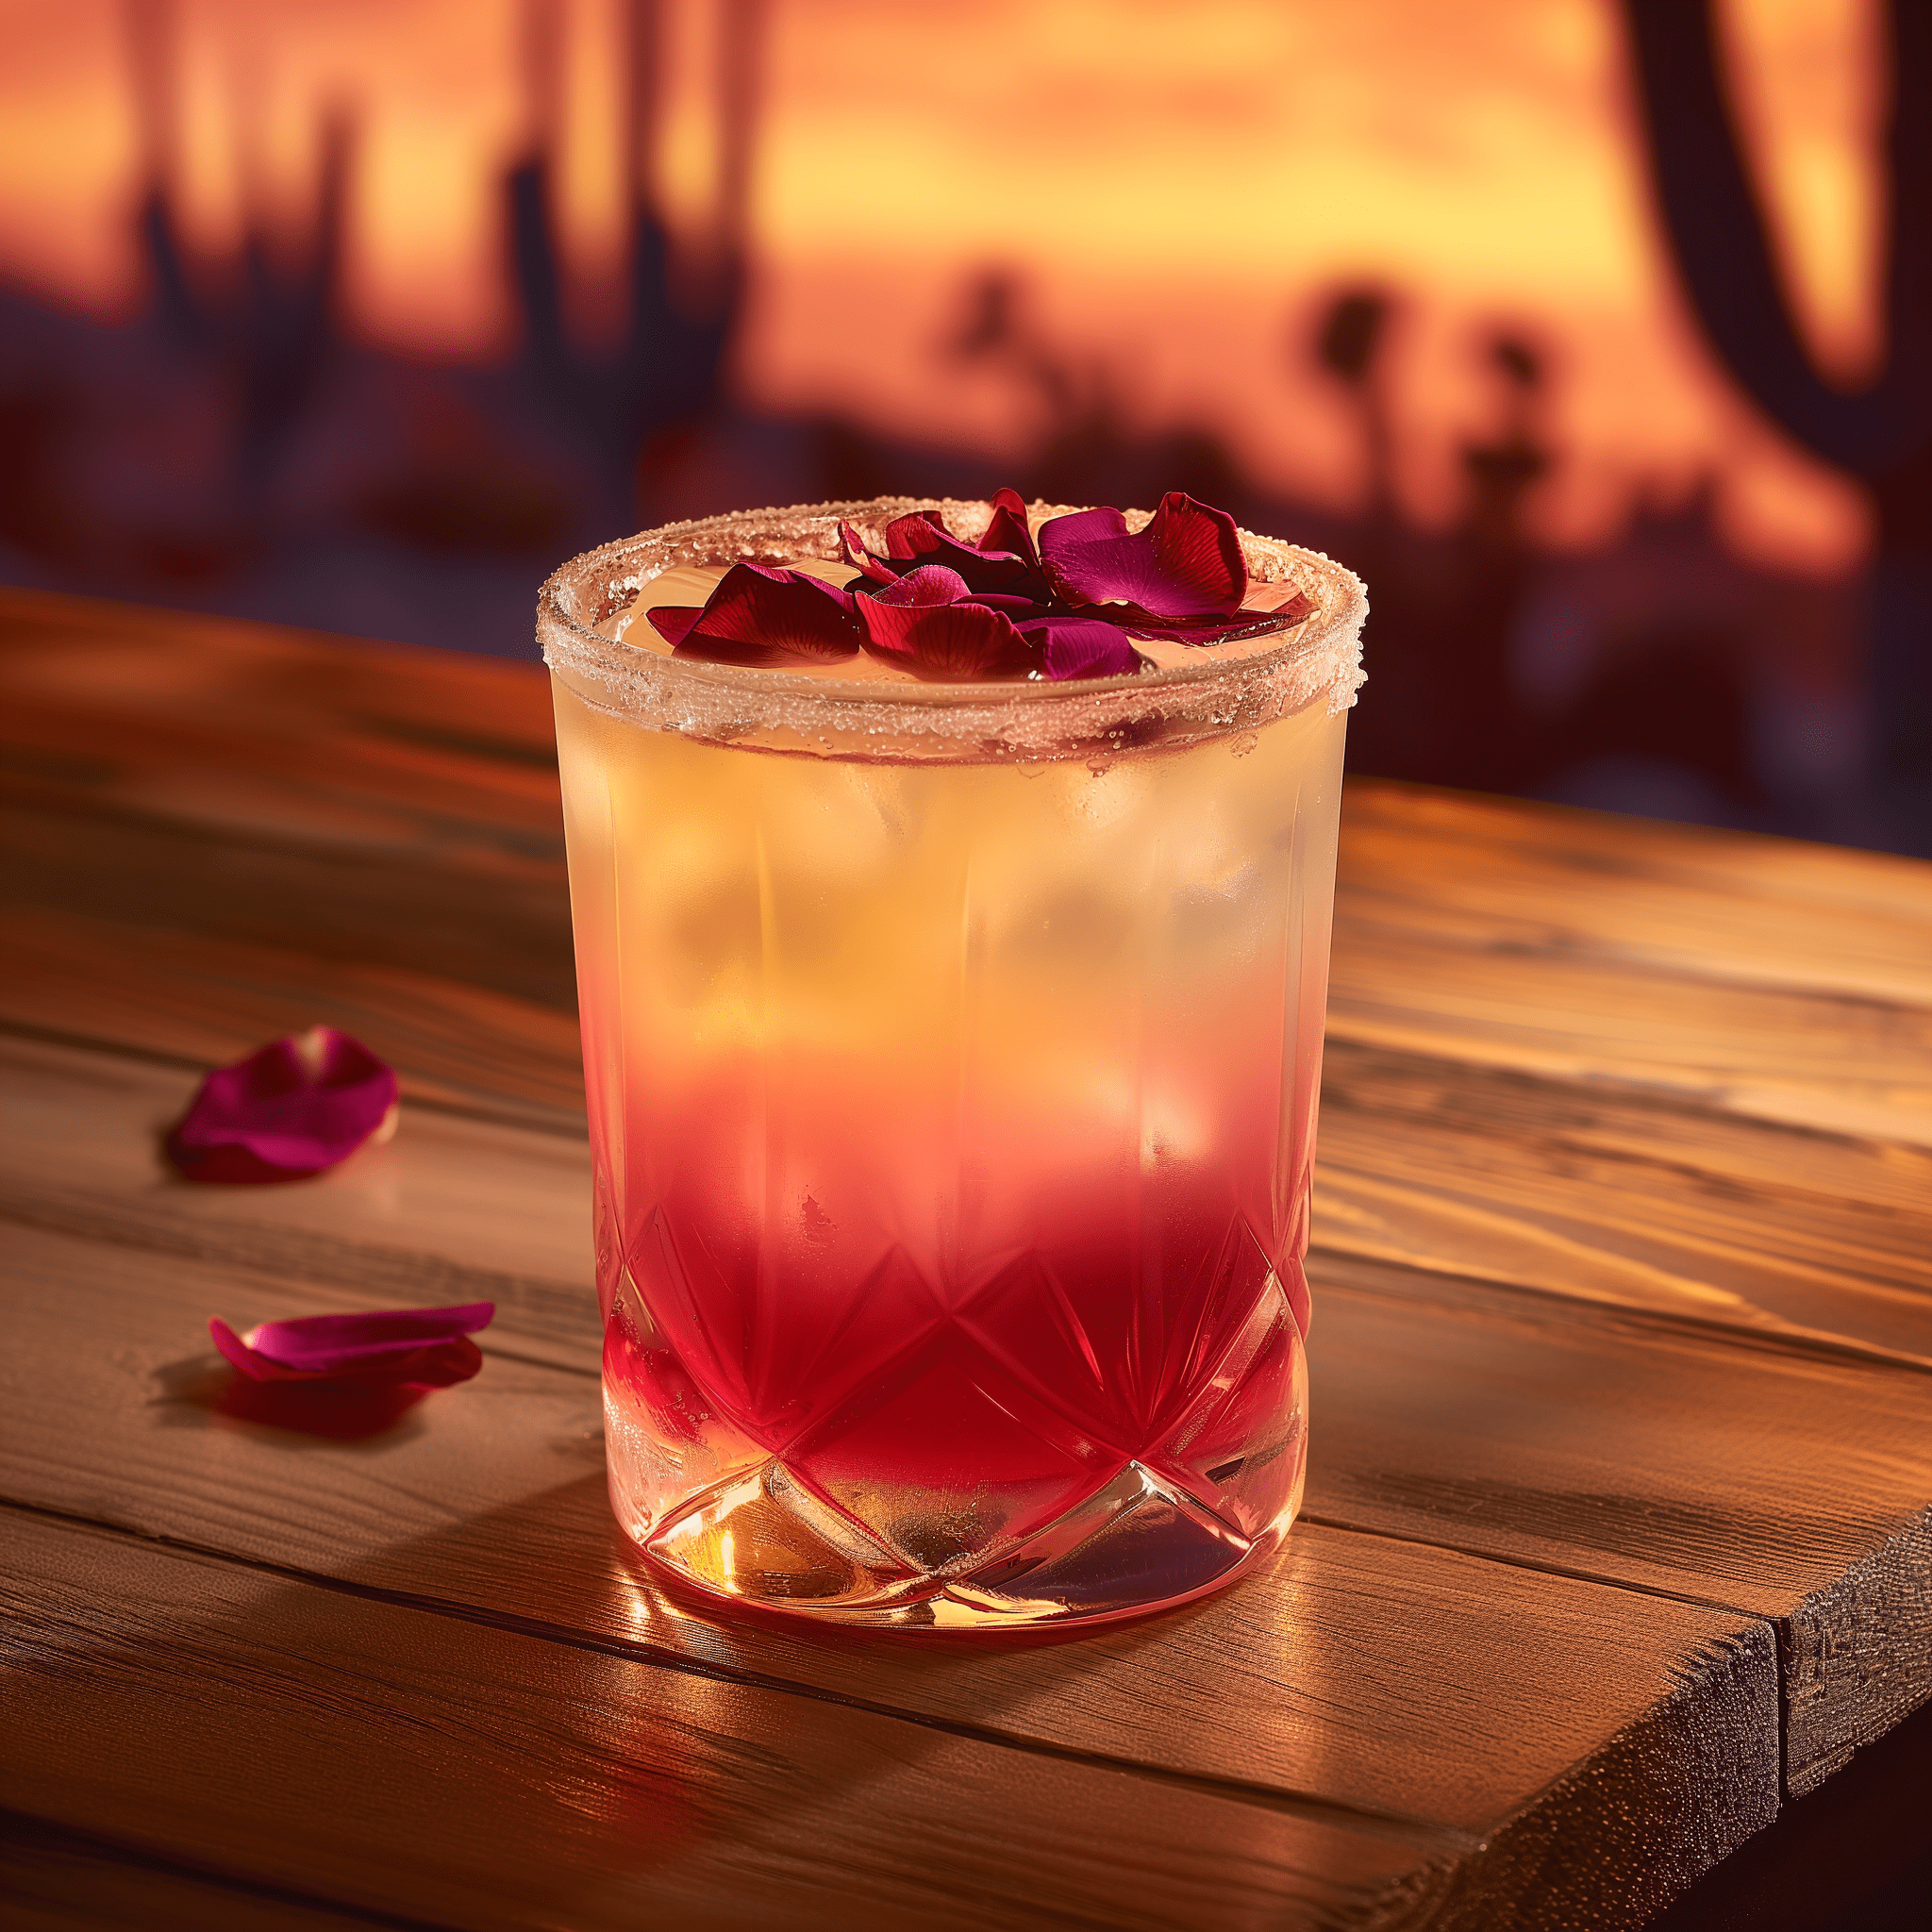 Desert Rose Cocktail Recipe - Desert Rose offers a delightful symphony of flavors, with a sweet foundation complemented by a tart edge. The floral undertones of rose water are subtle yet captivating, while the citrus provides a refreshing zing. It's a light and fragrant cocktail that leaves a pleasant, lingering aftertaste.